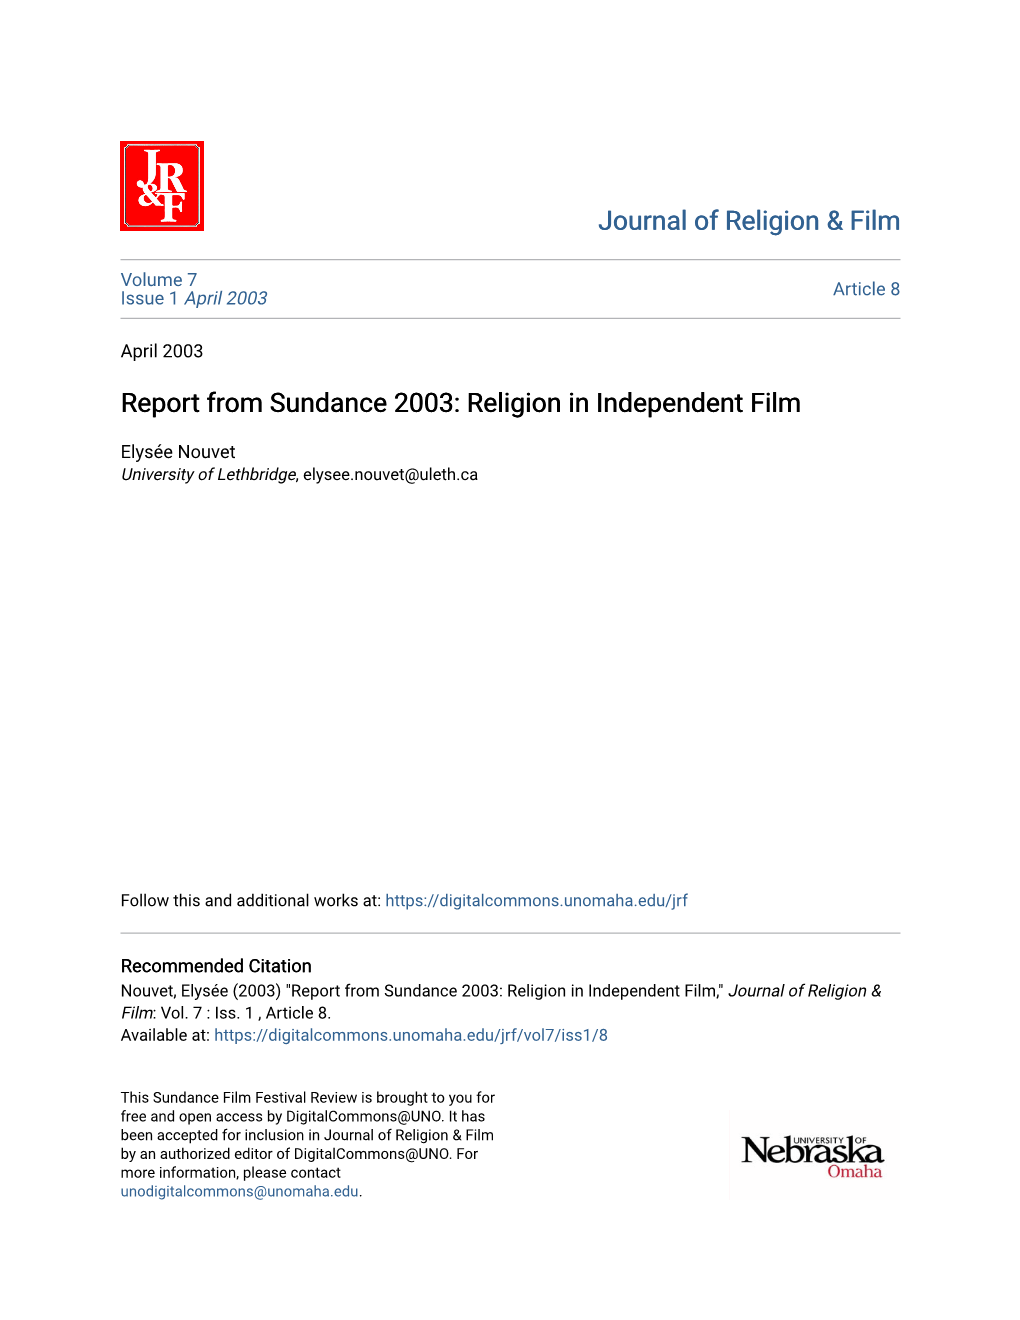 Report from Sundance 2003: Religion in Independent Film